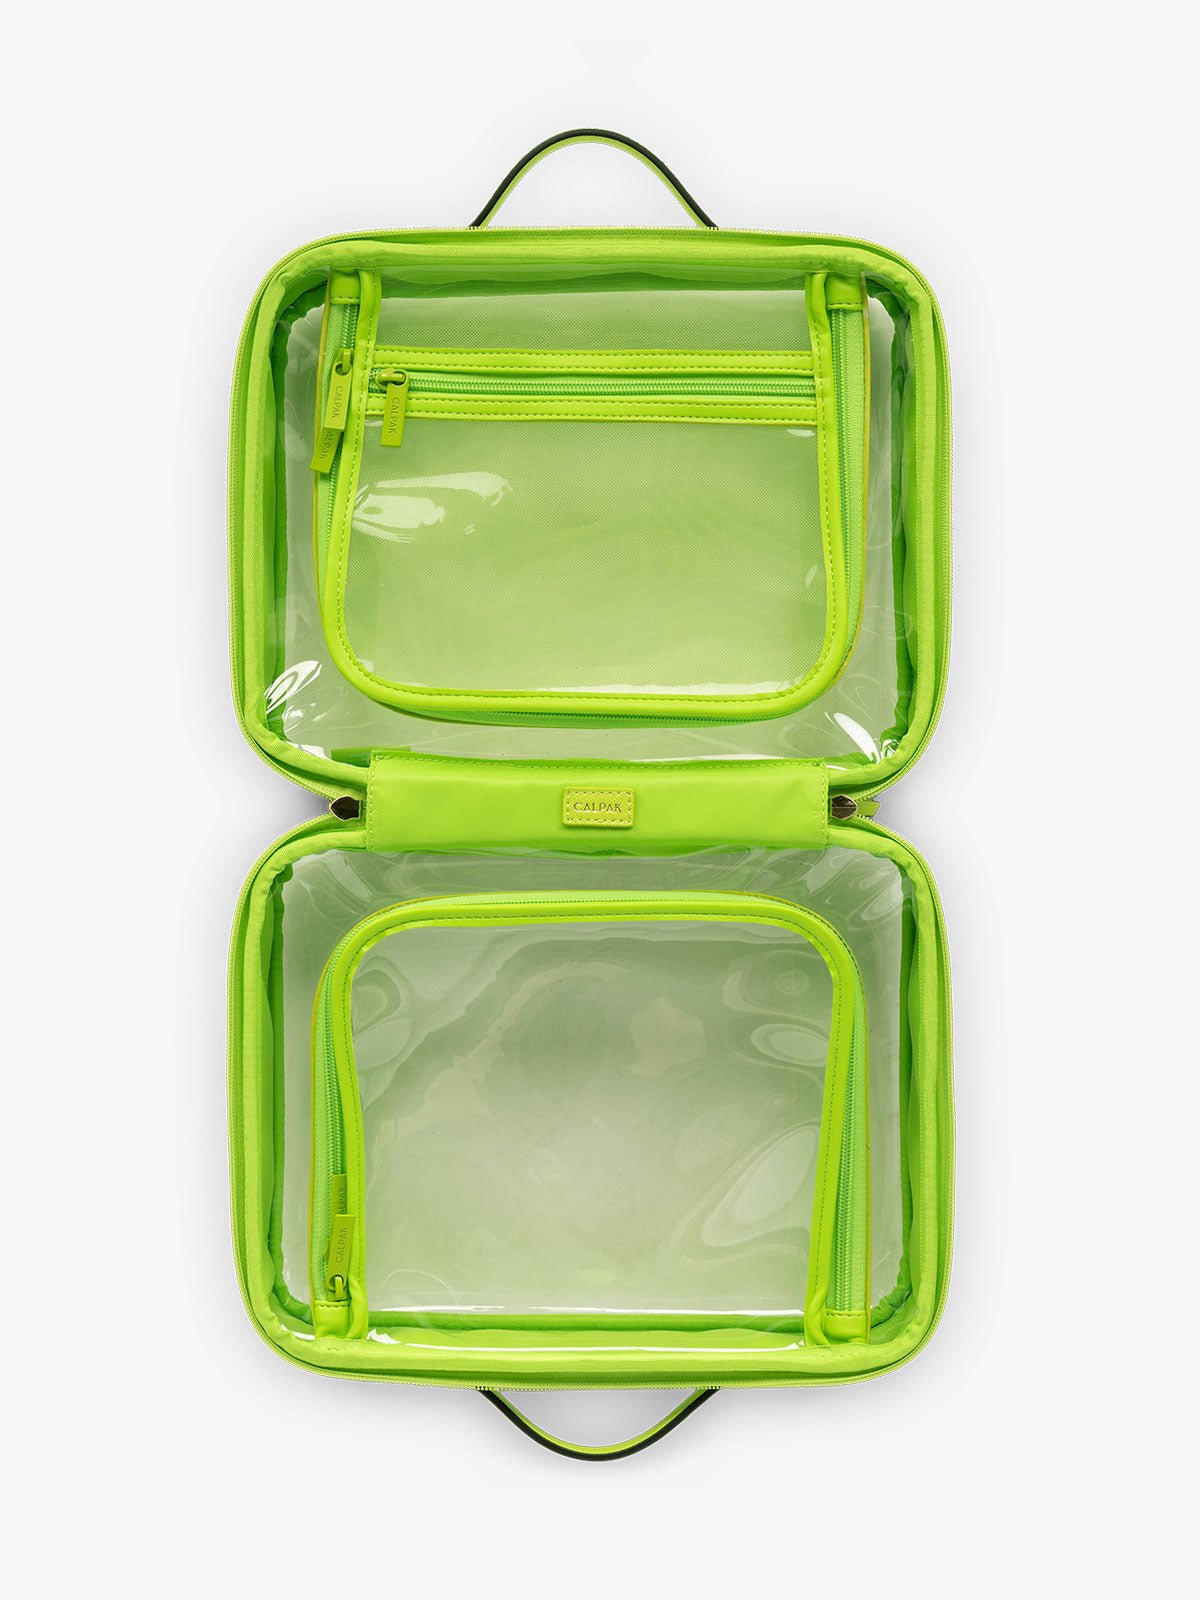 CALPAK large transparent water resistant travel makeup bag with compartments in green